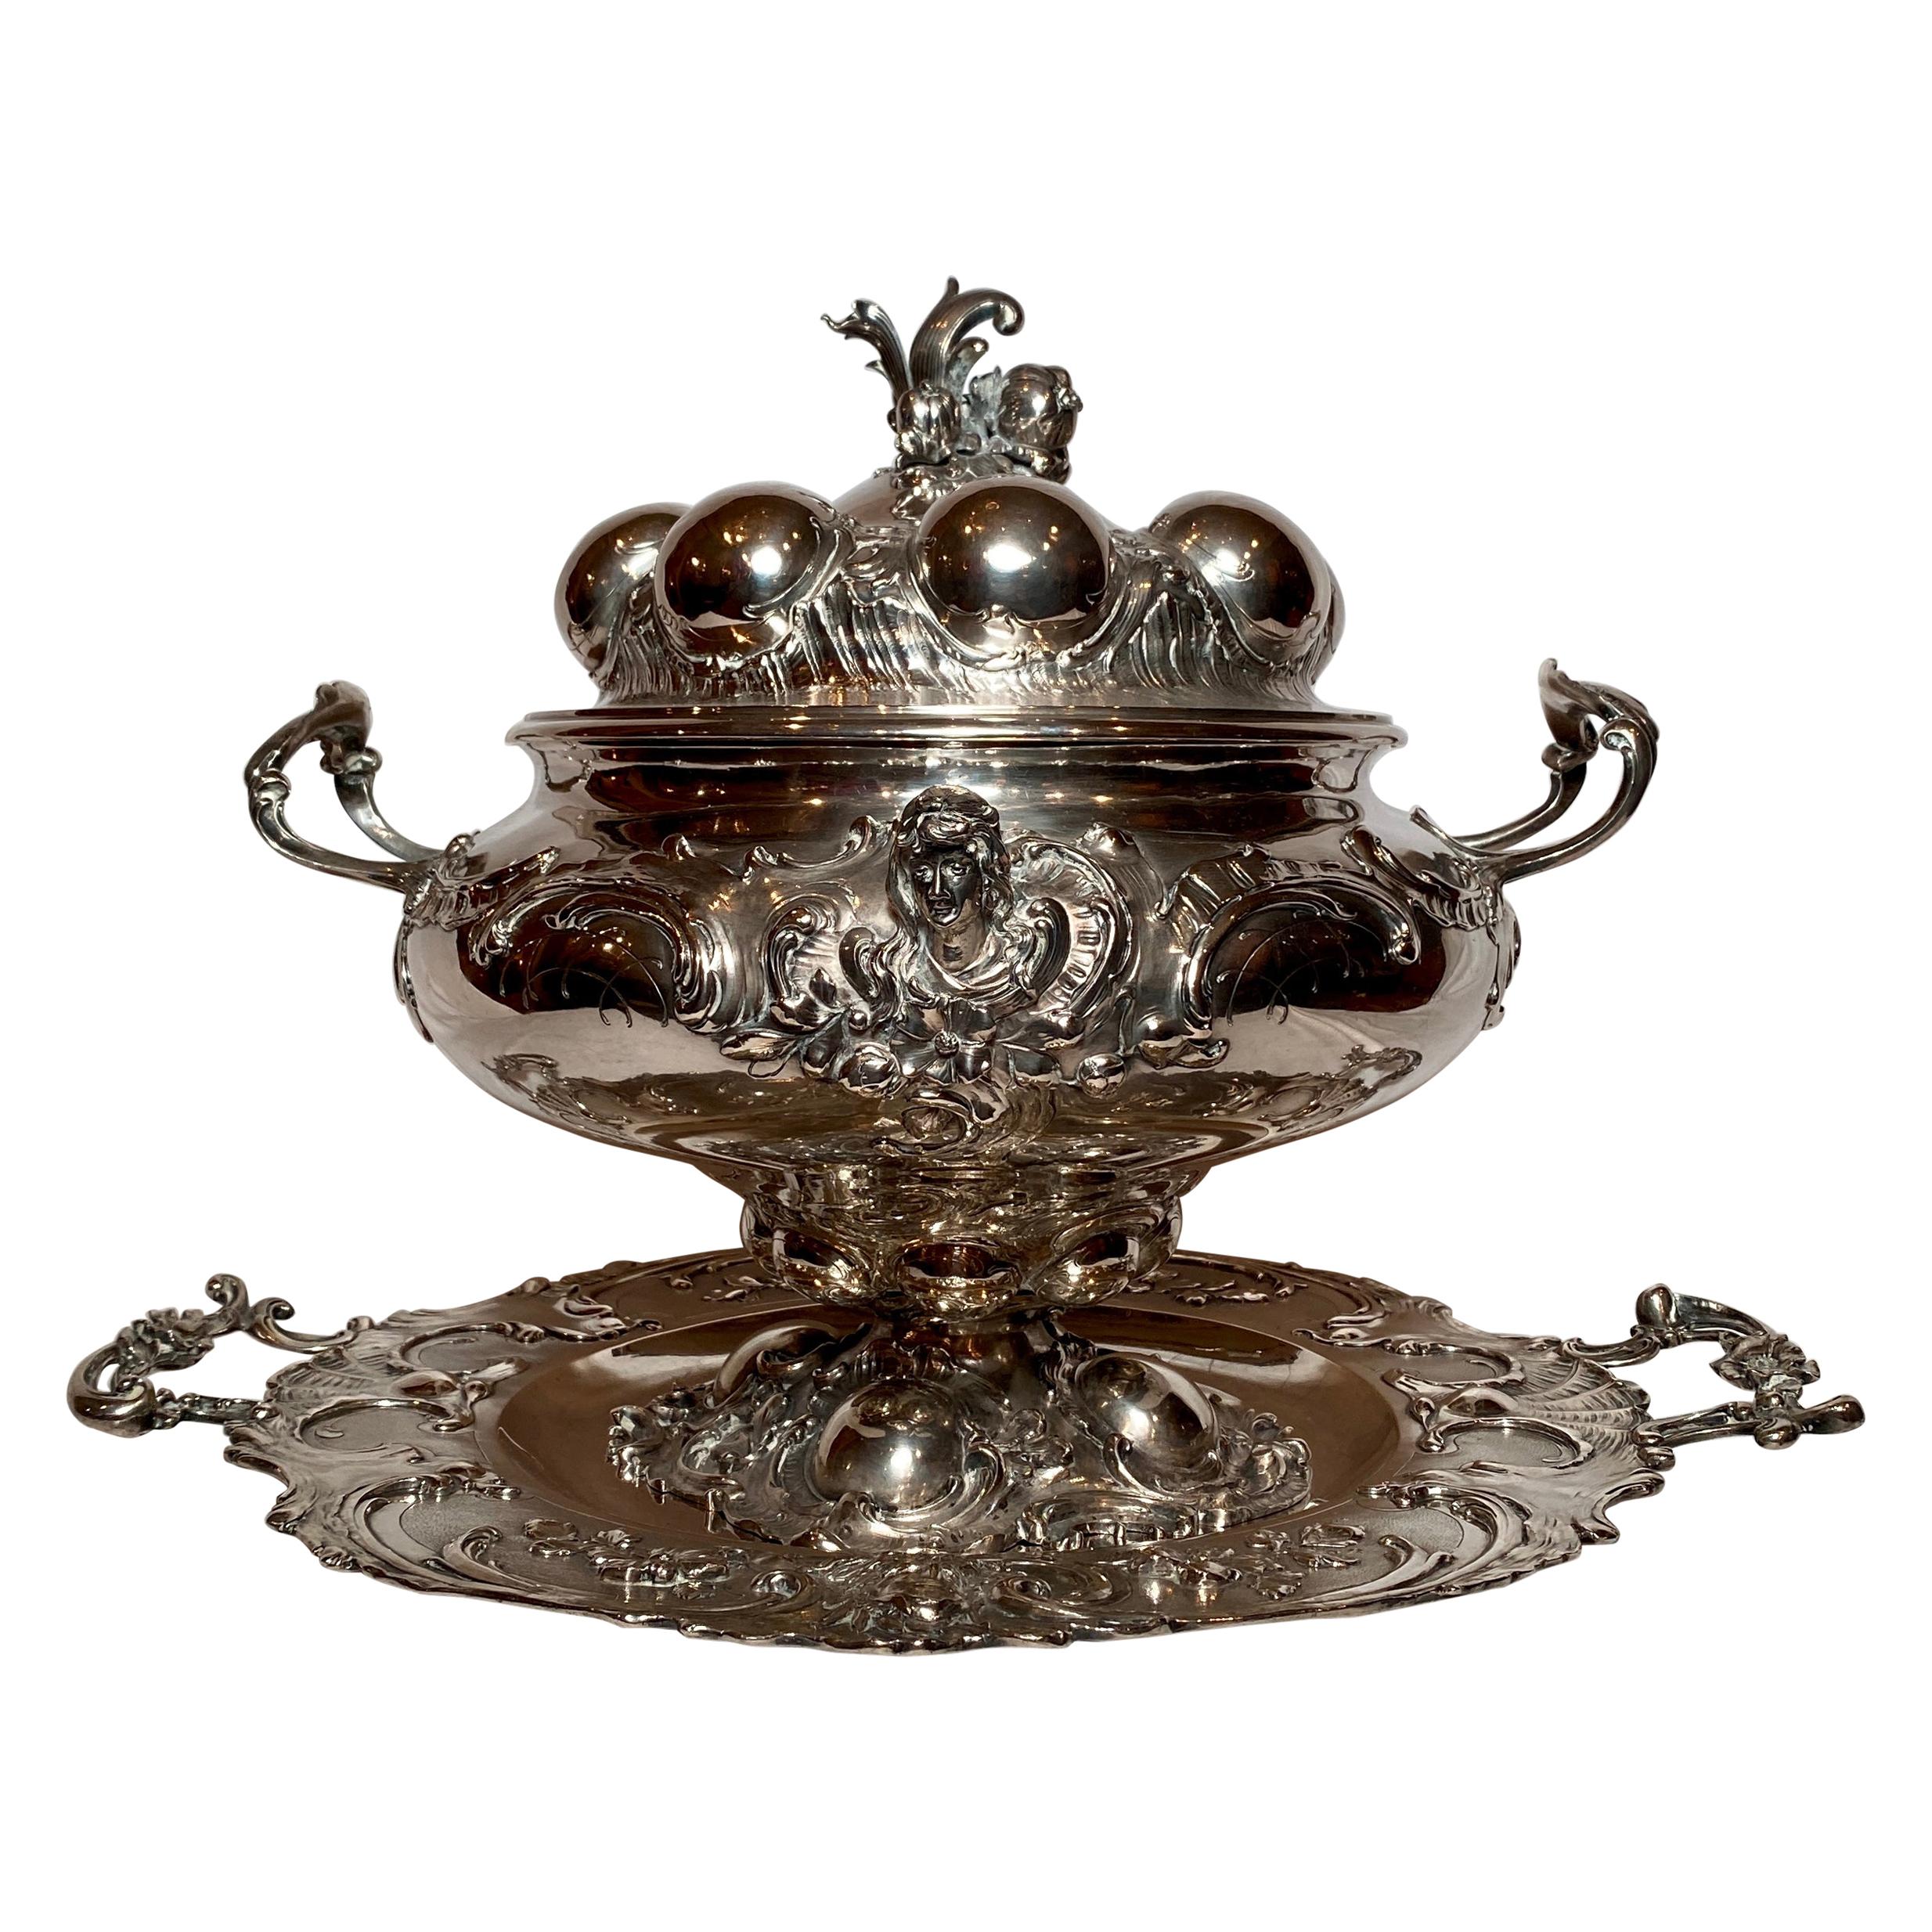 Antique Continental Silver Tureen and Platter, Circa 1880-1890